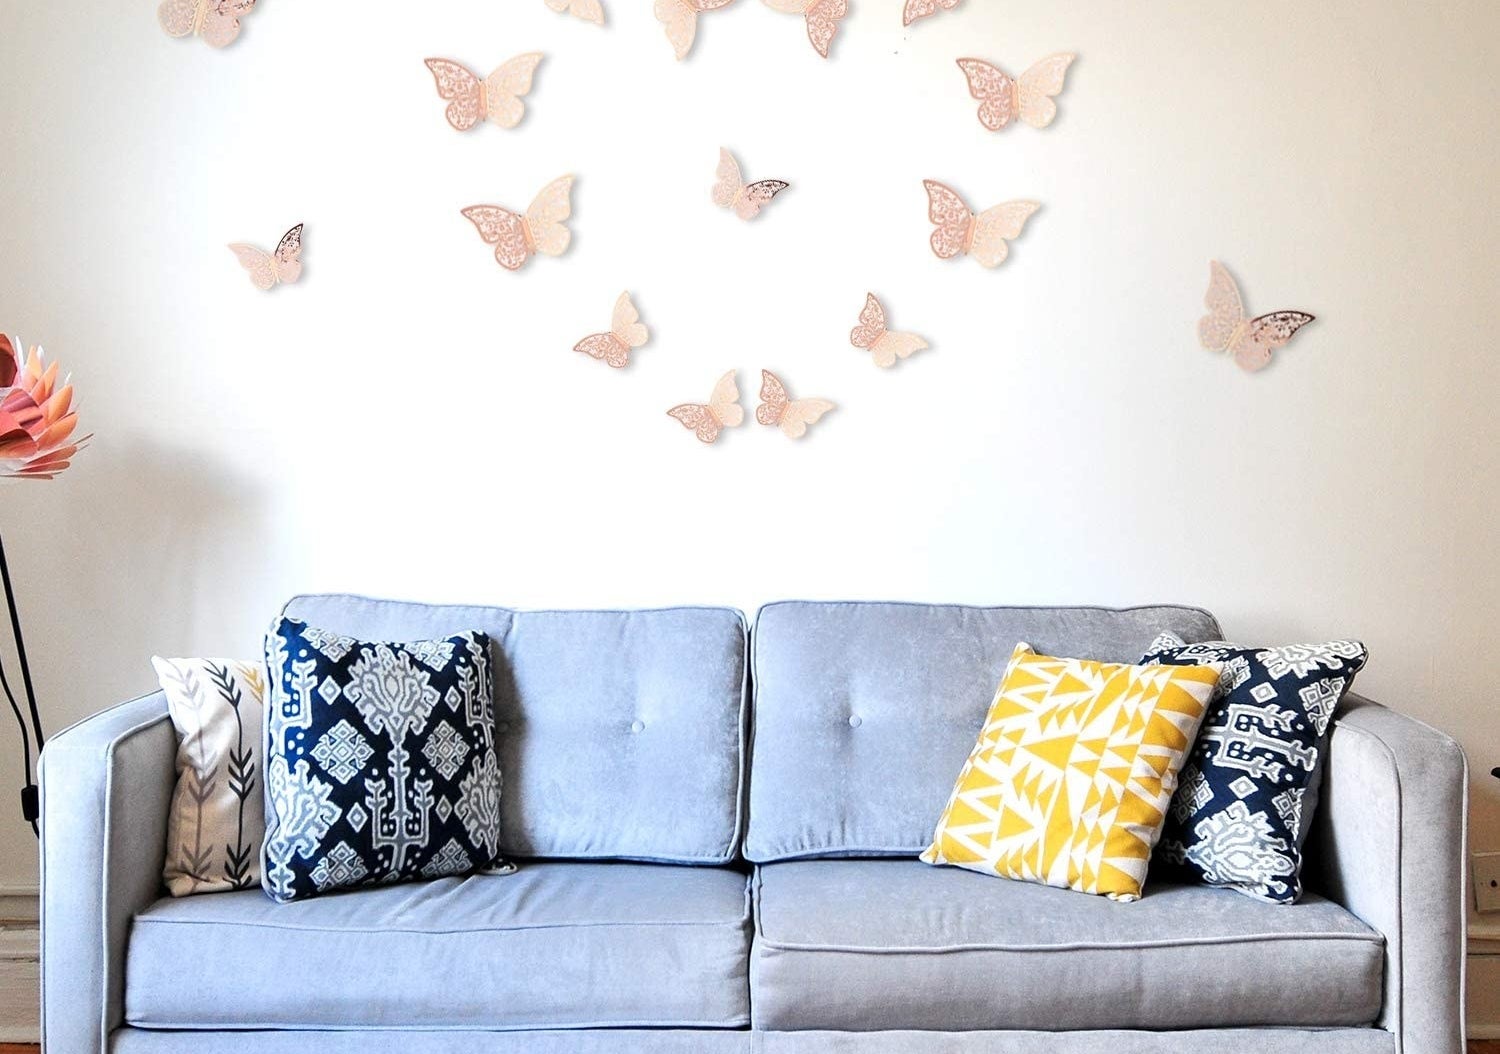 The butterfly decals on a wall above a couch